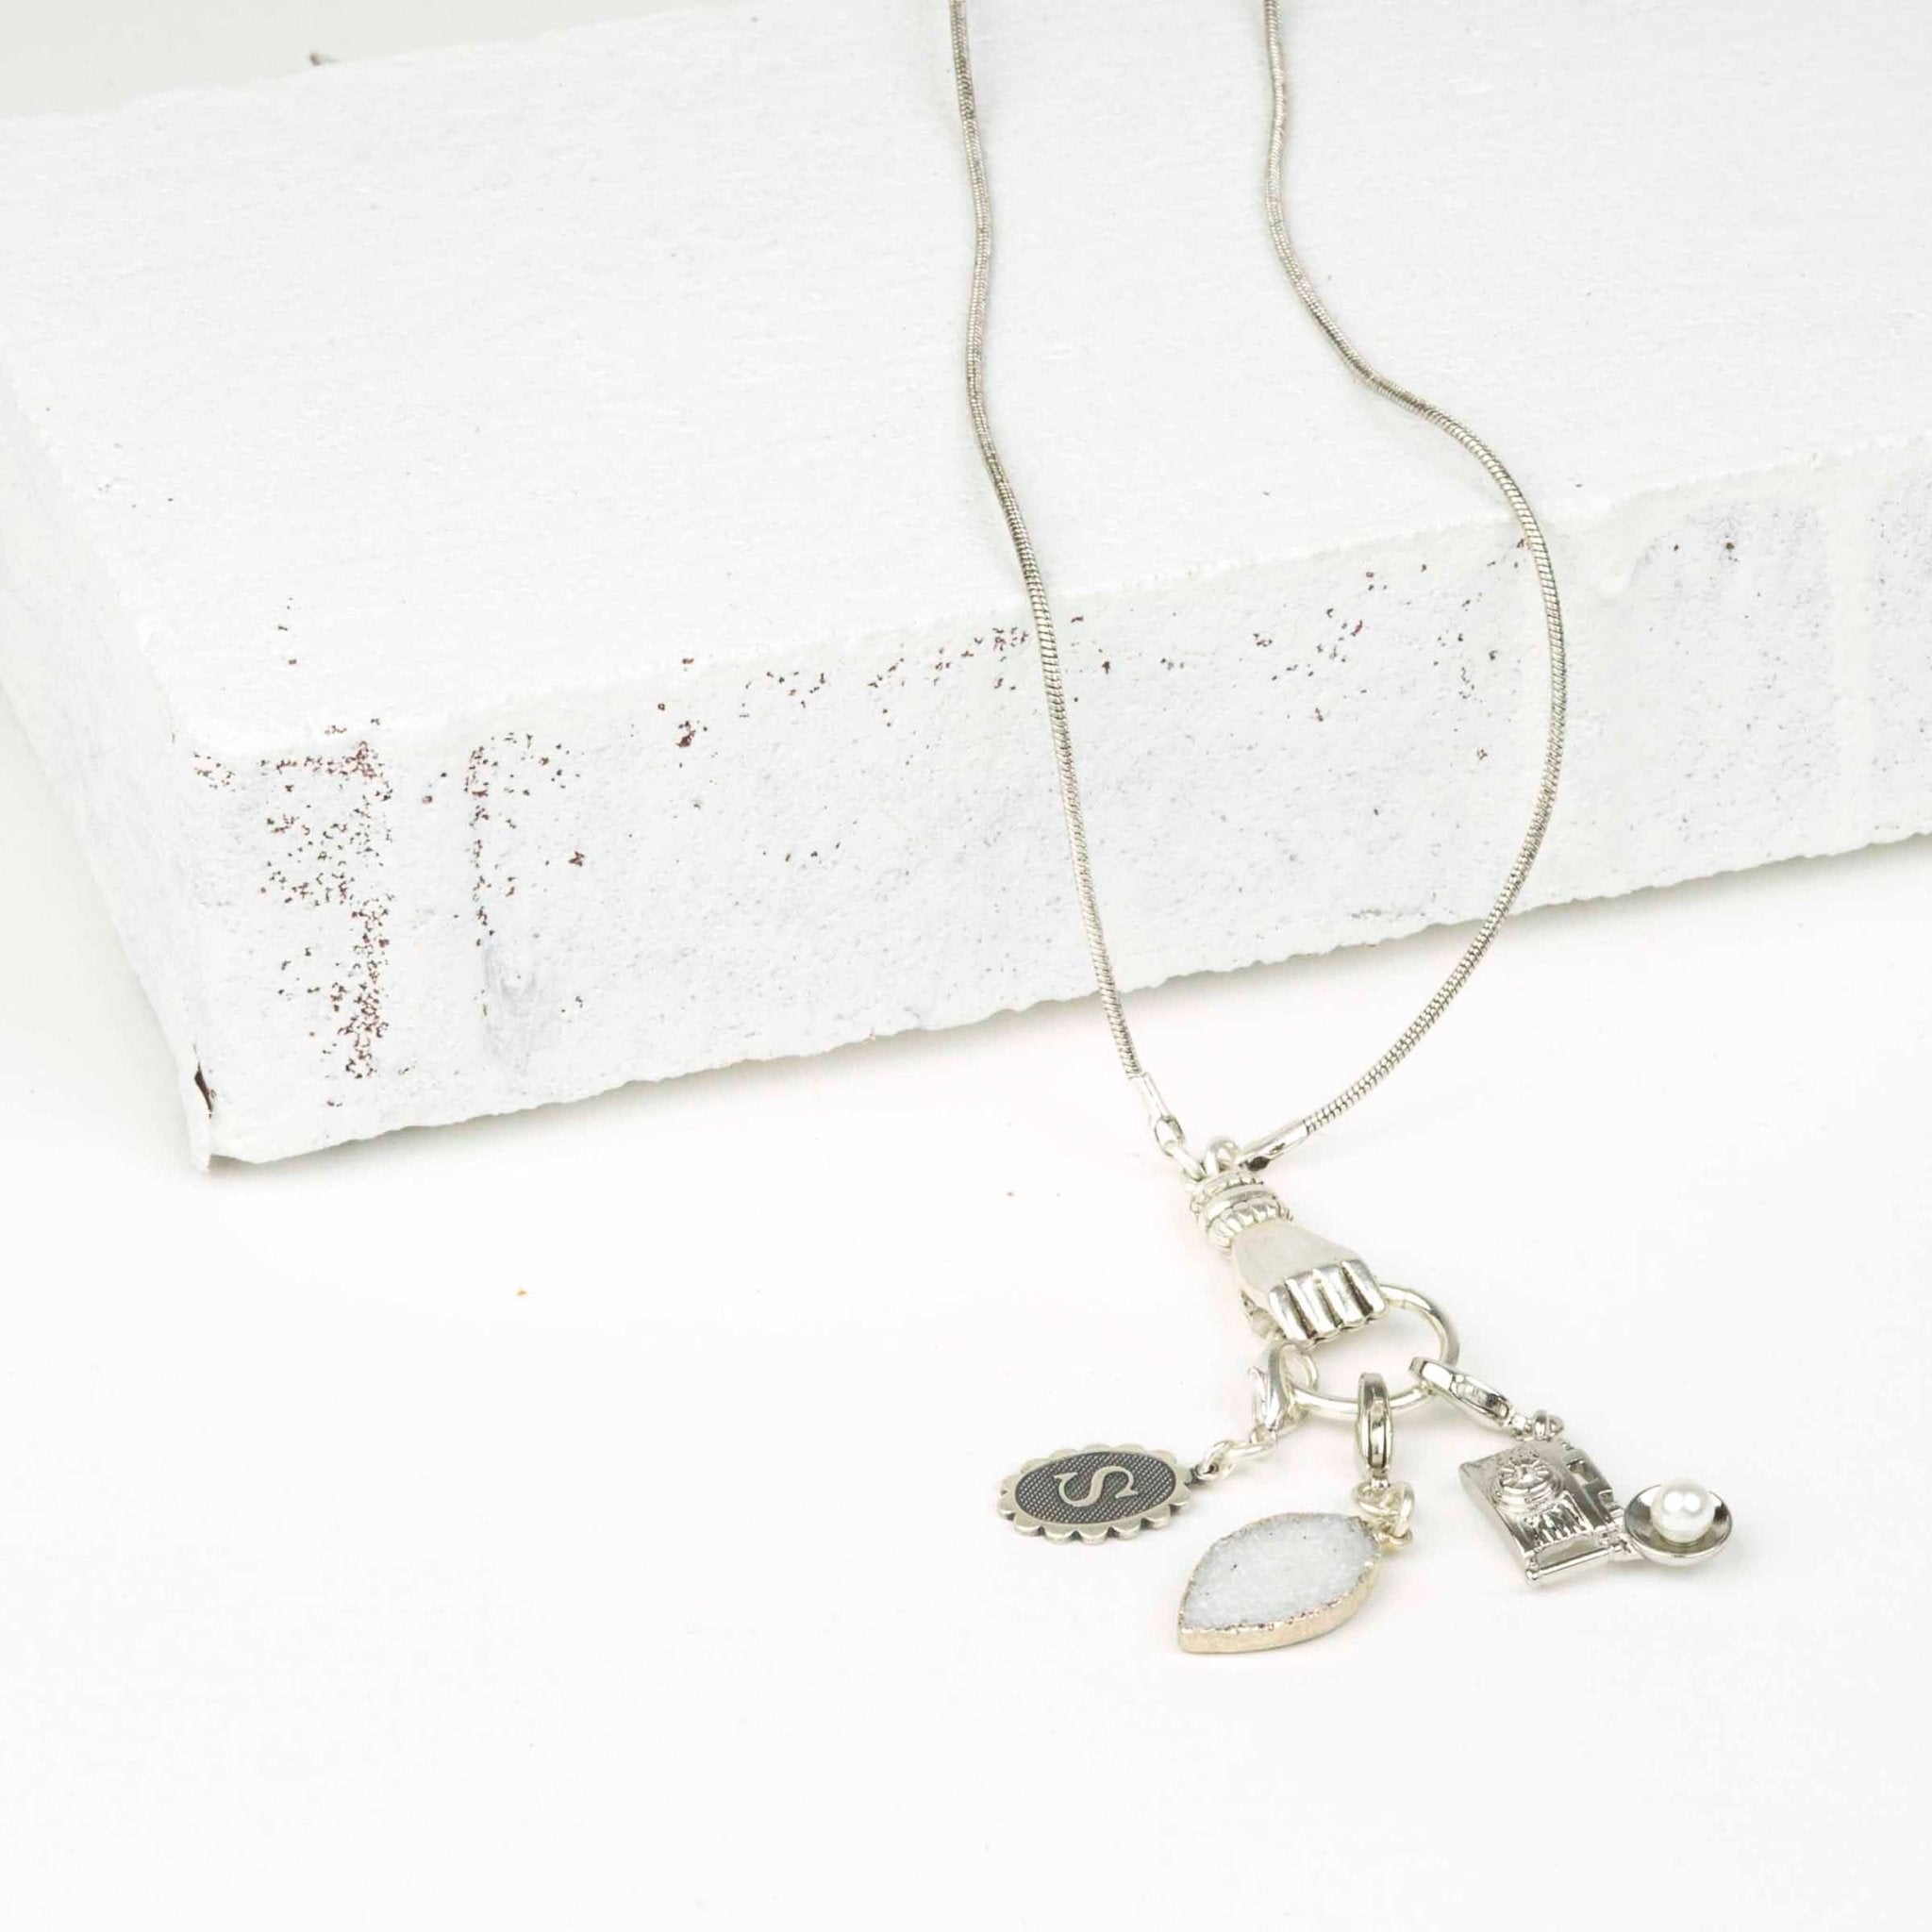 Discover our Unique Hand Made Charm Holder Necklace - J.H. Breakell and Co.